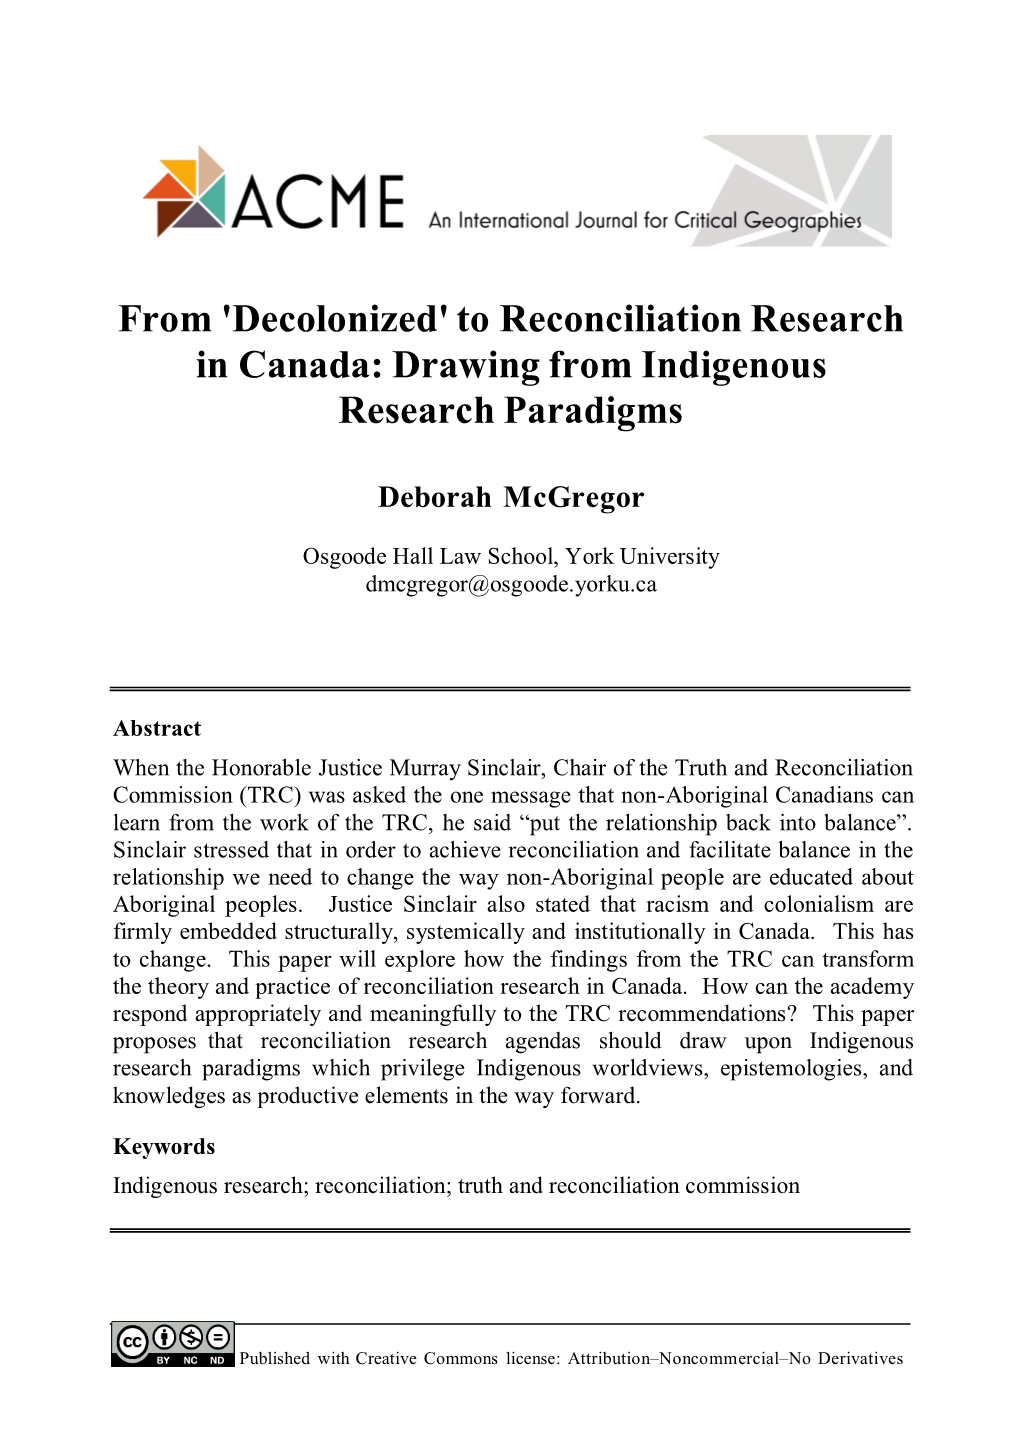 To Reconciliation Research in Canada: Drawing from Indigenous Research Paradigms